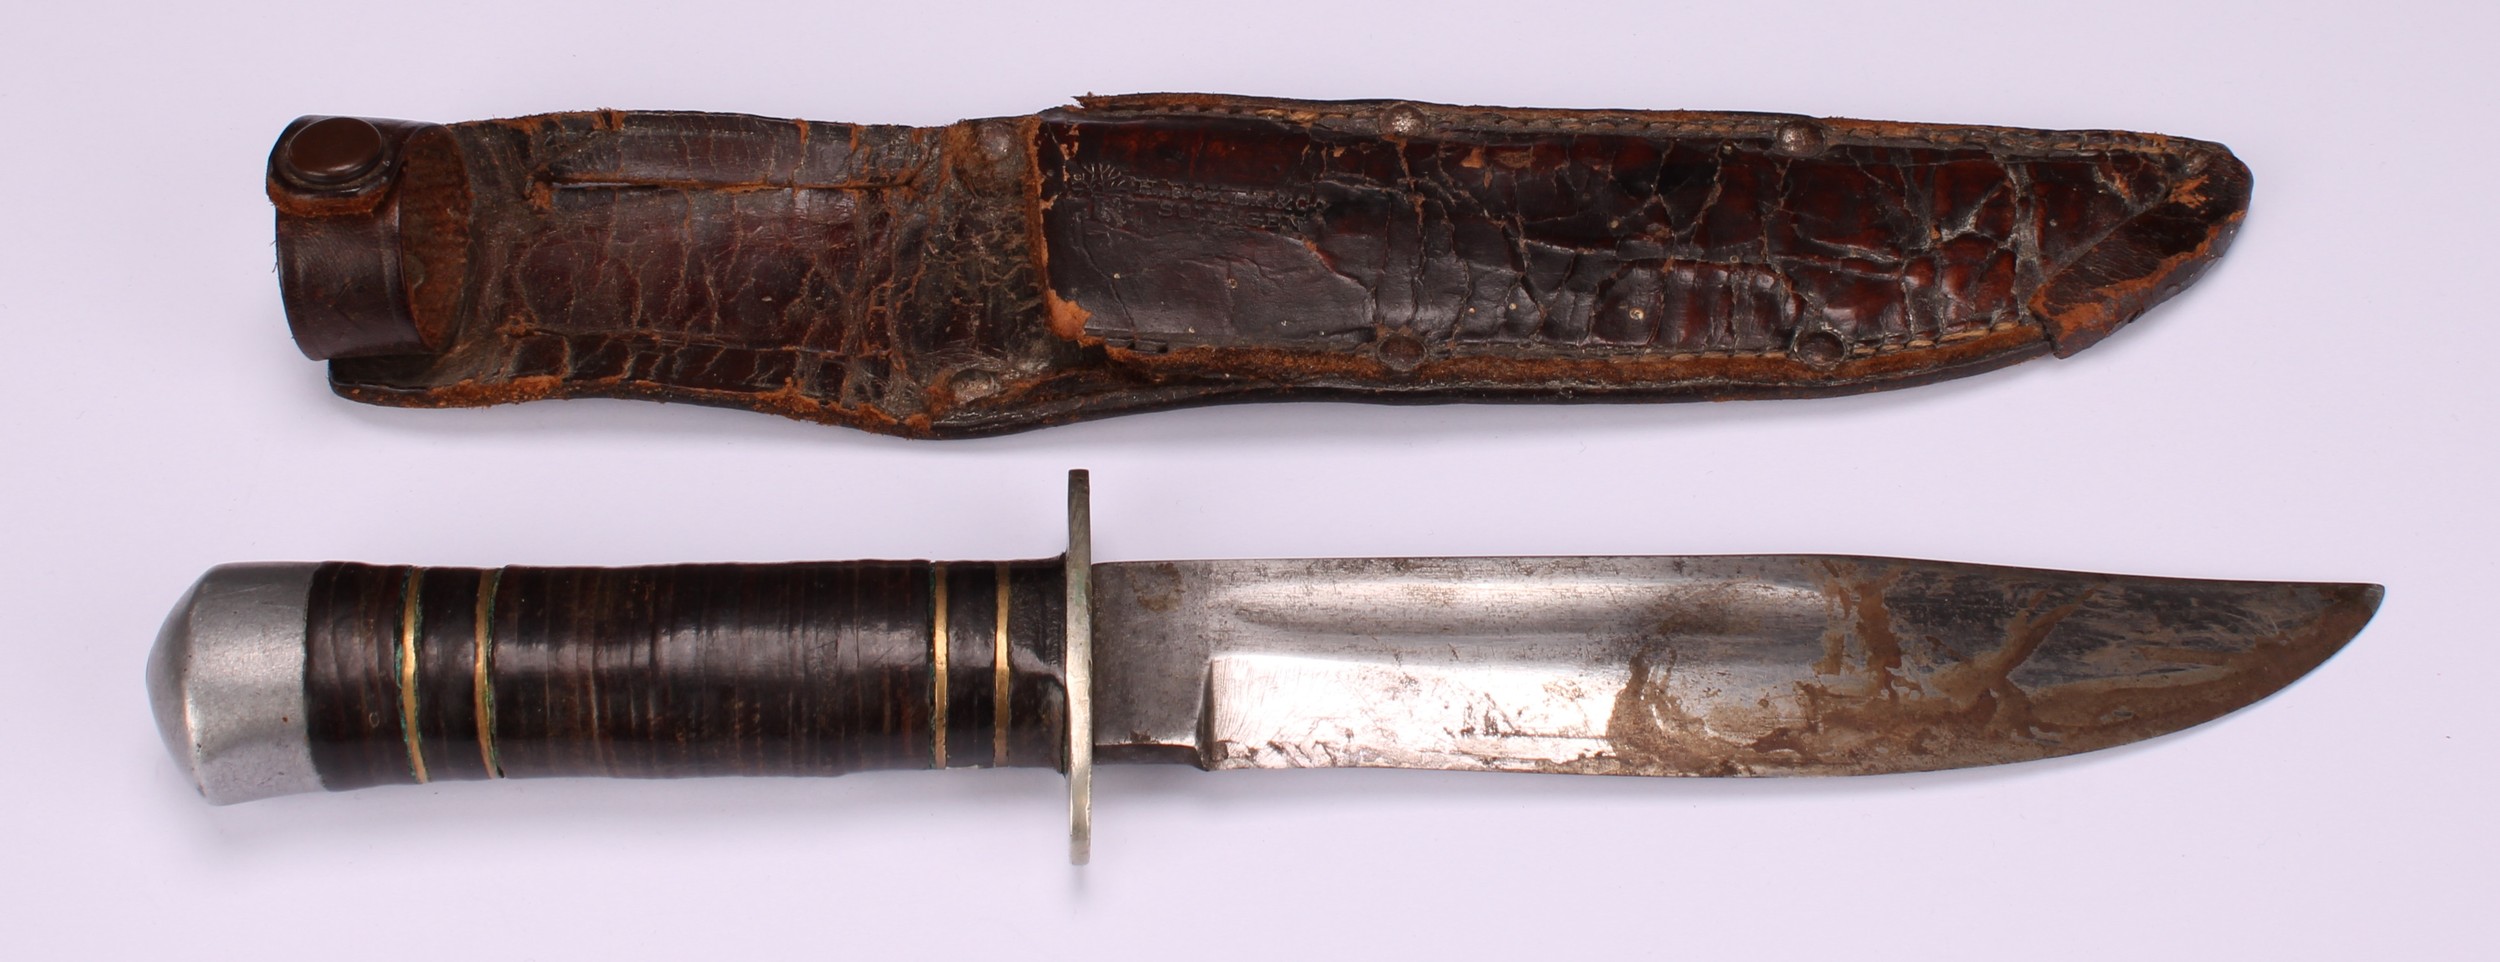 An early to mid-20th century German hunting or utility knife, by Heinrich Böker & Co., Solingen, - Image 3 of 5